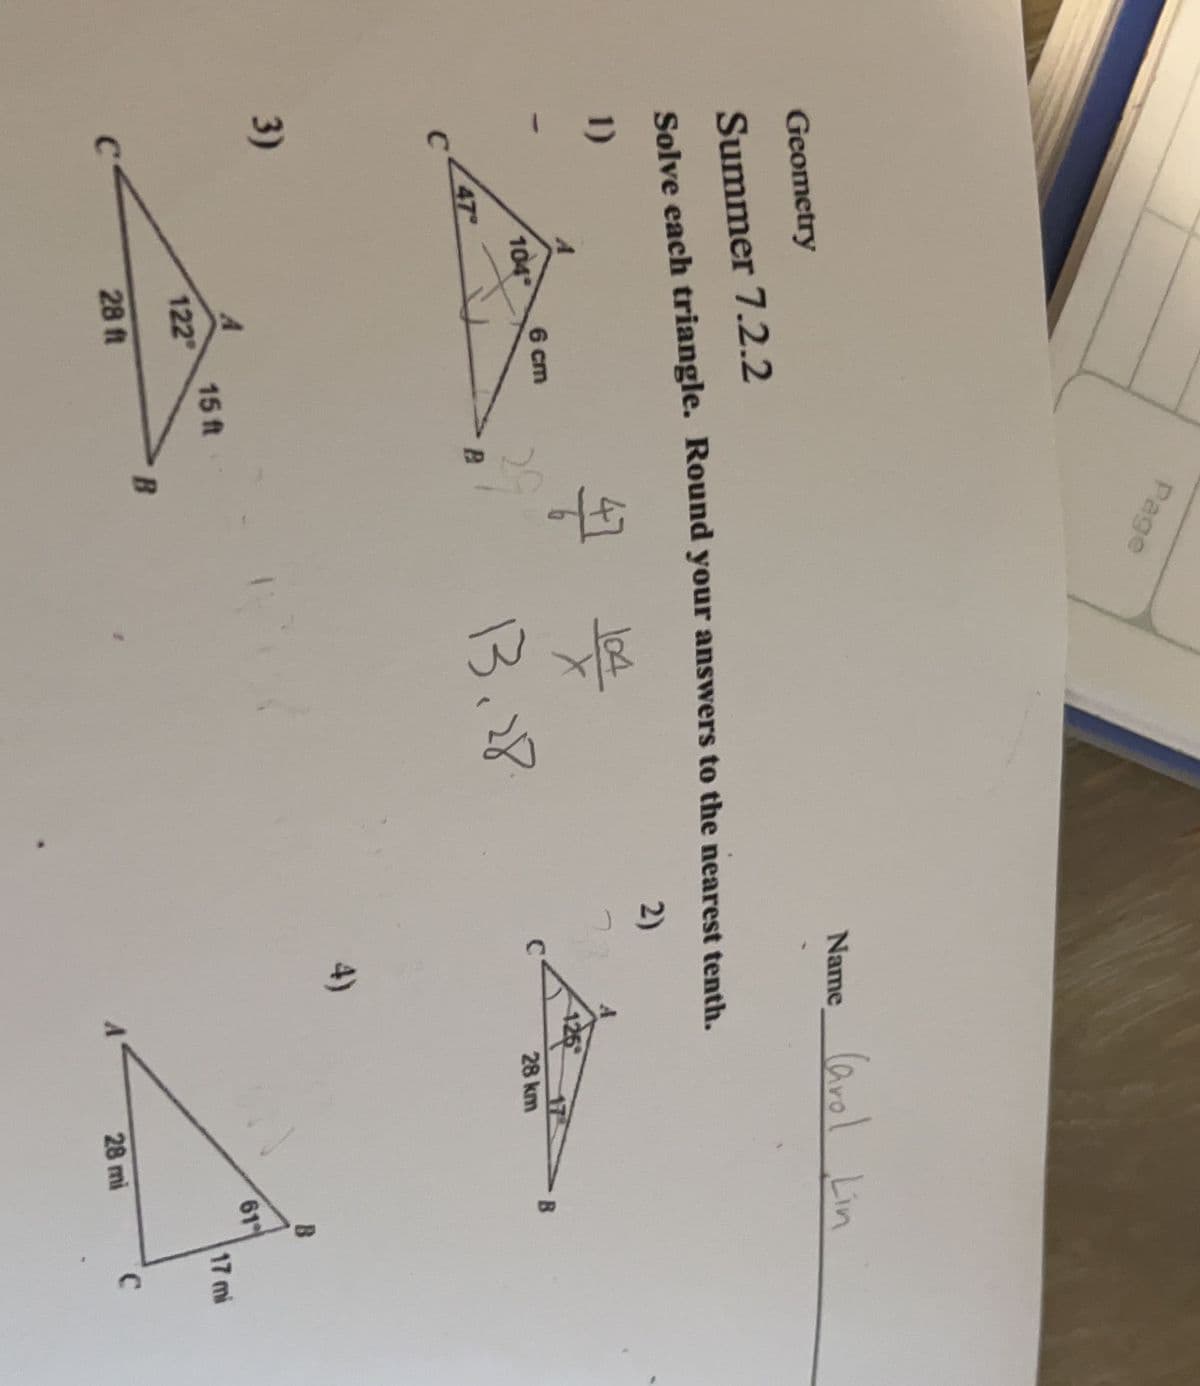 C
Geometry
Summer 7.2.2
Solve each triangle. Round your answers to the nearest tenth.
1)
2)
3)
47
104
6 cm
A
122
28 ft
Page
15 ft
47 104
29
B
Name Carol Lin
13.28.
28 km
28 mi
B
B
61
17 mi
C